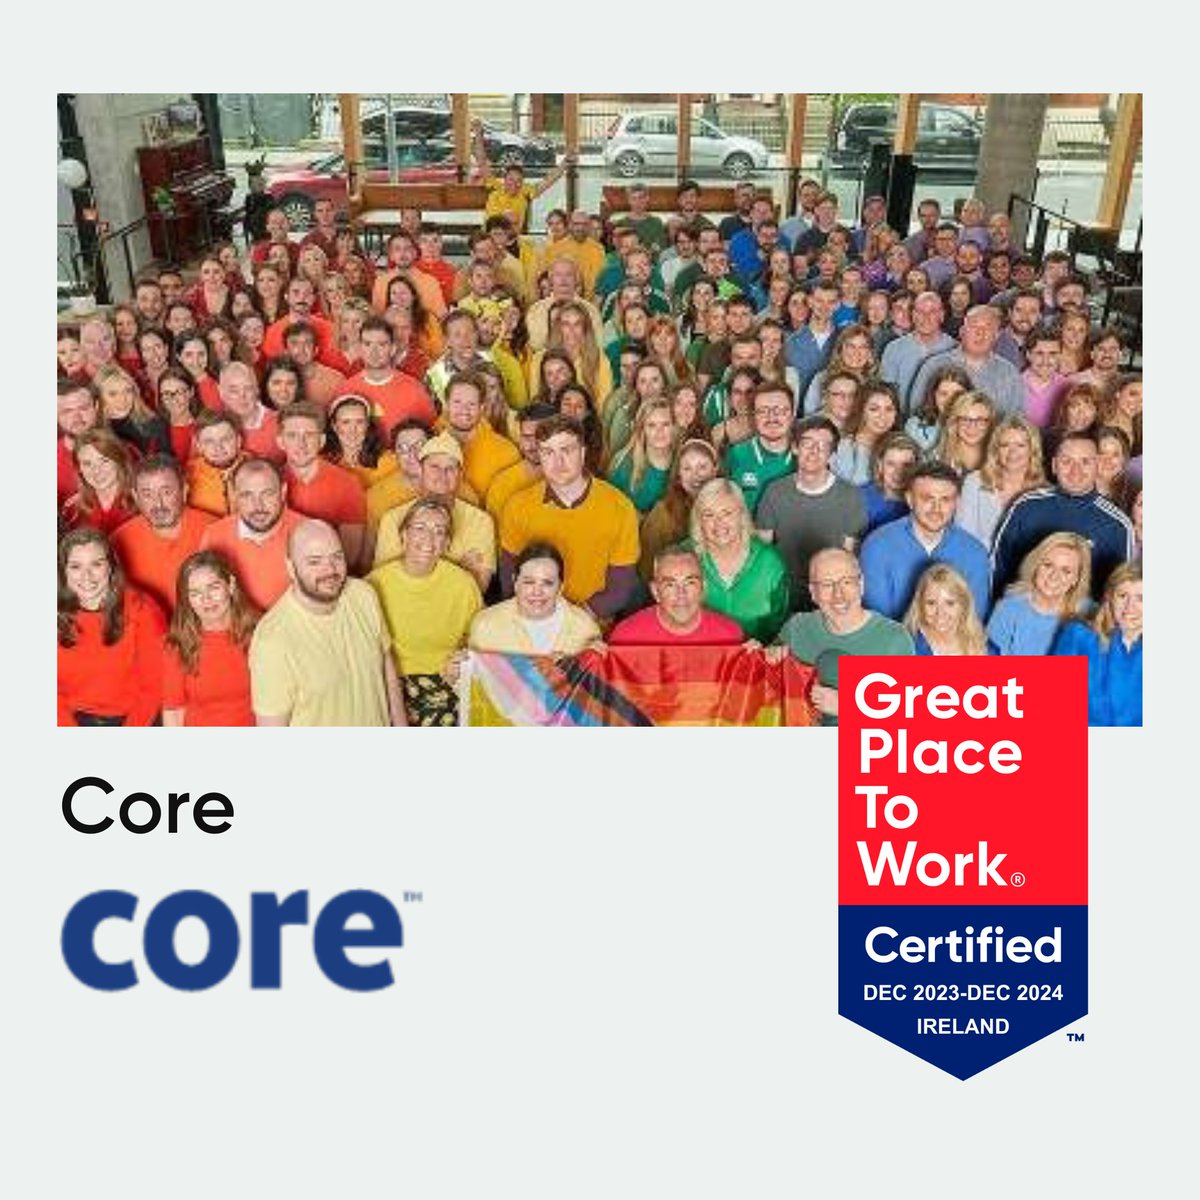 CERTIFICATION 🏅| Congratulations to Core for being Certified™ as a #greatplacetowork again! Well done to the team for this amazing achievement! 

Check out their Great culture 👉  hubs.li/Q02lGYz-0

#gptw #gptwcertified #certifiedgreat